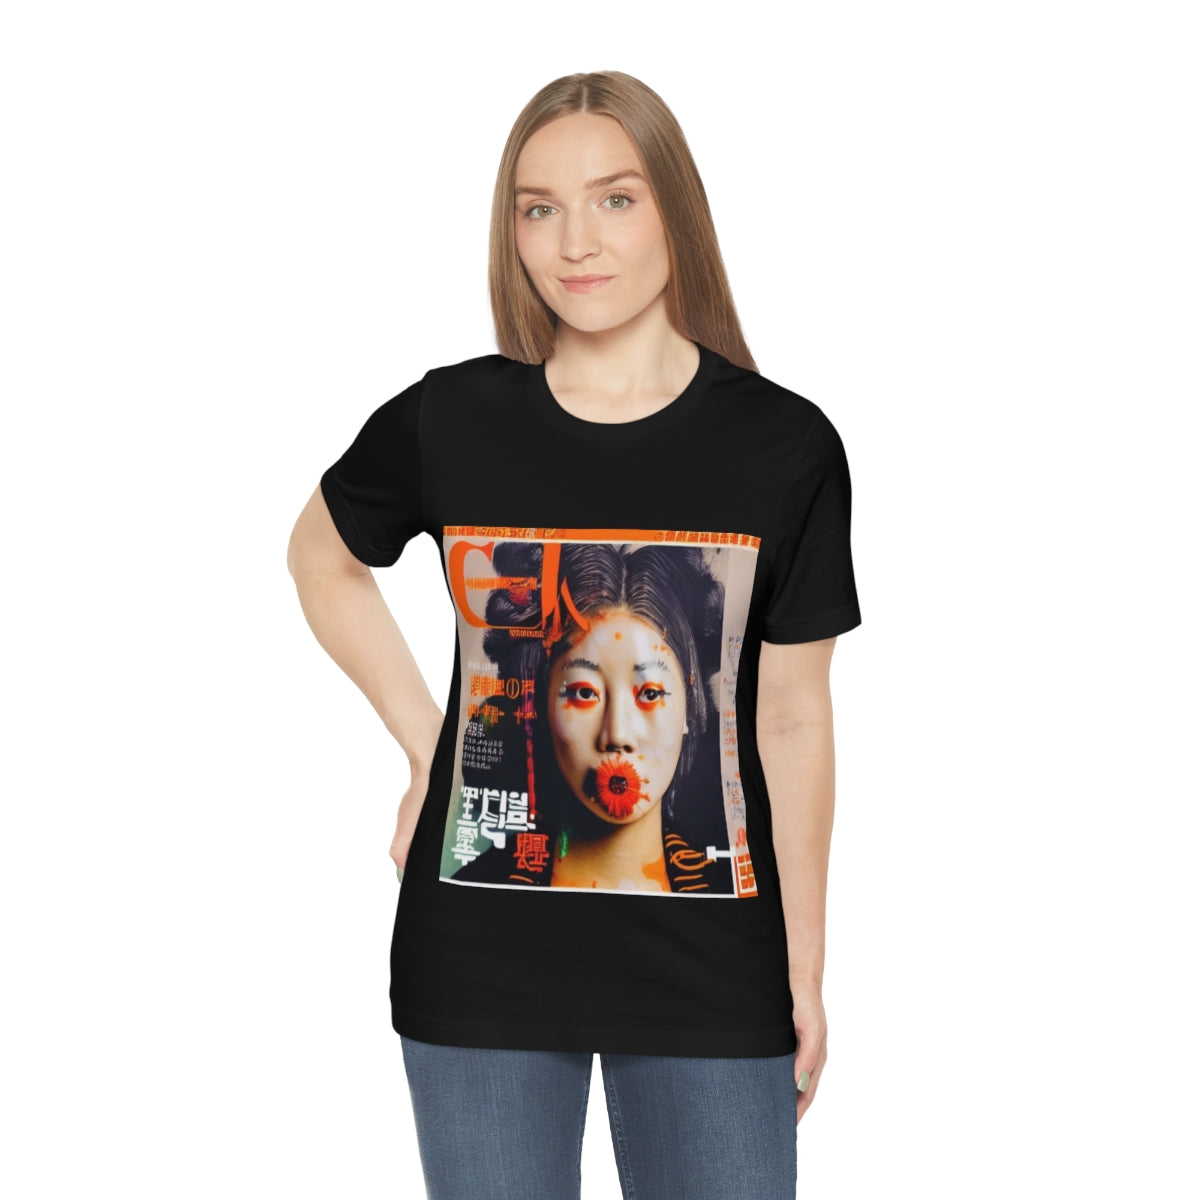 Restless_Mask Our Emotions T-Shirt Collection - DSIV